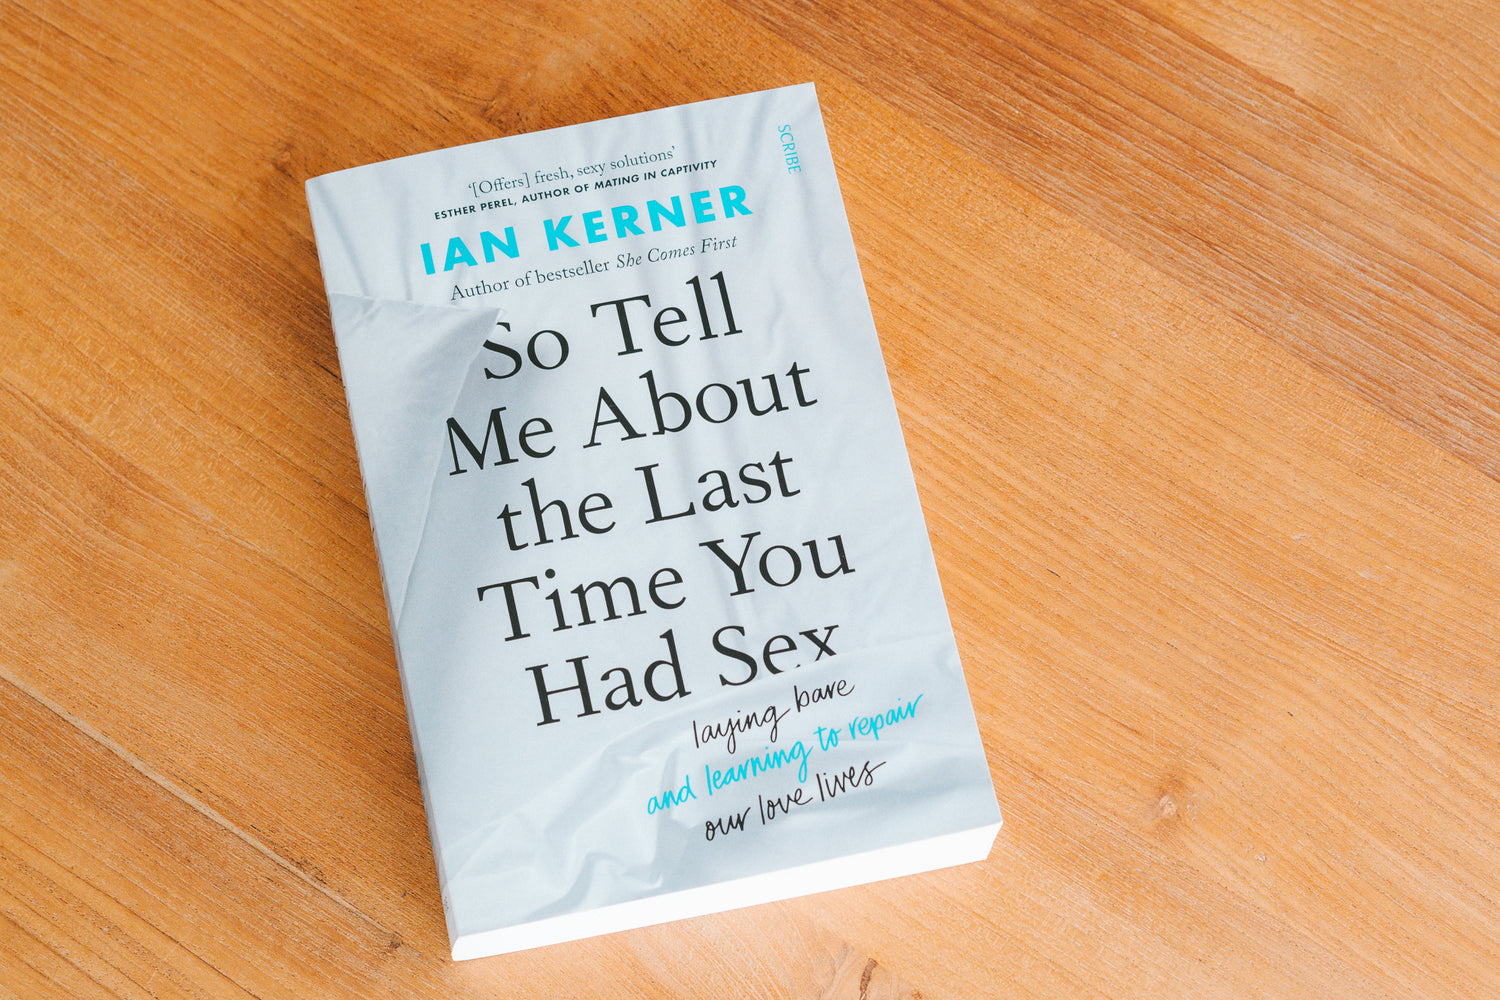 So Tell Me About The Last Time You Had Sex by Ian Kerner